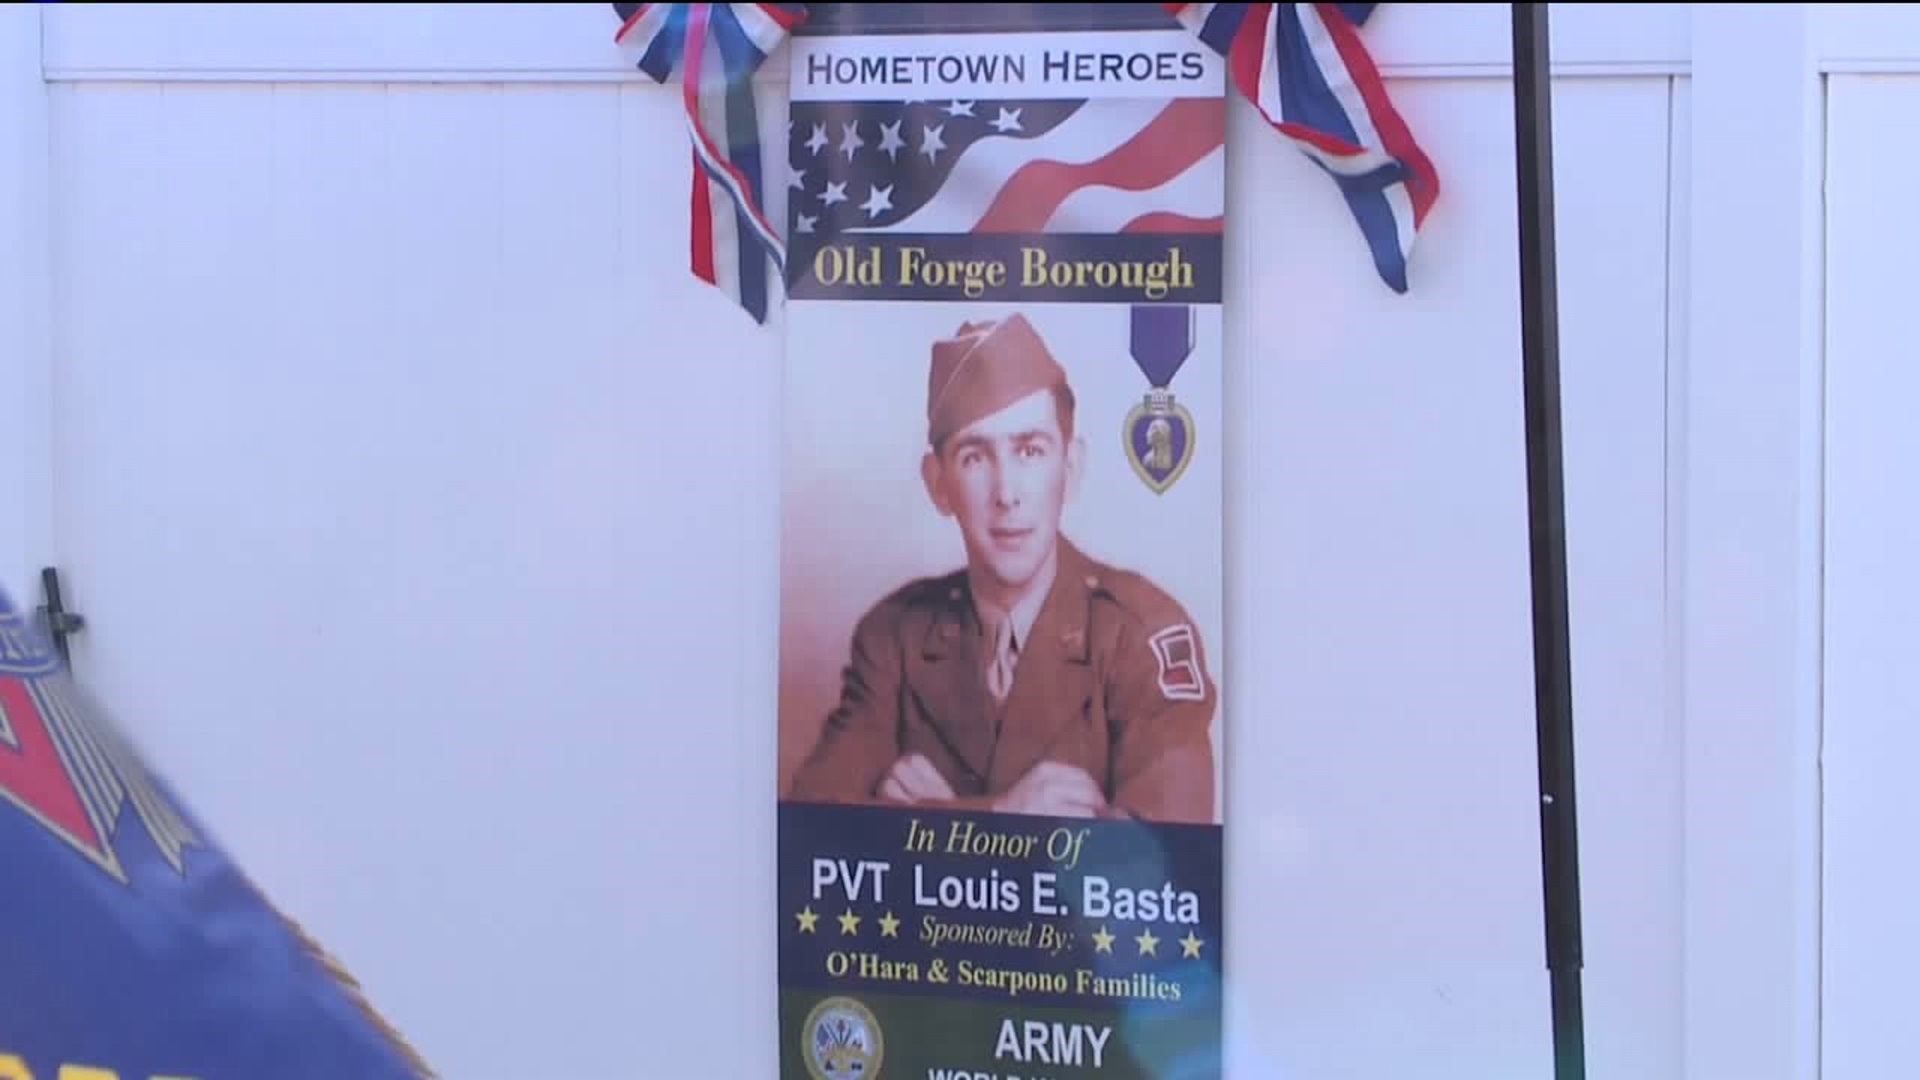 Veterans Honored in Old Forge